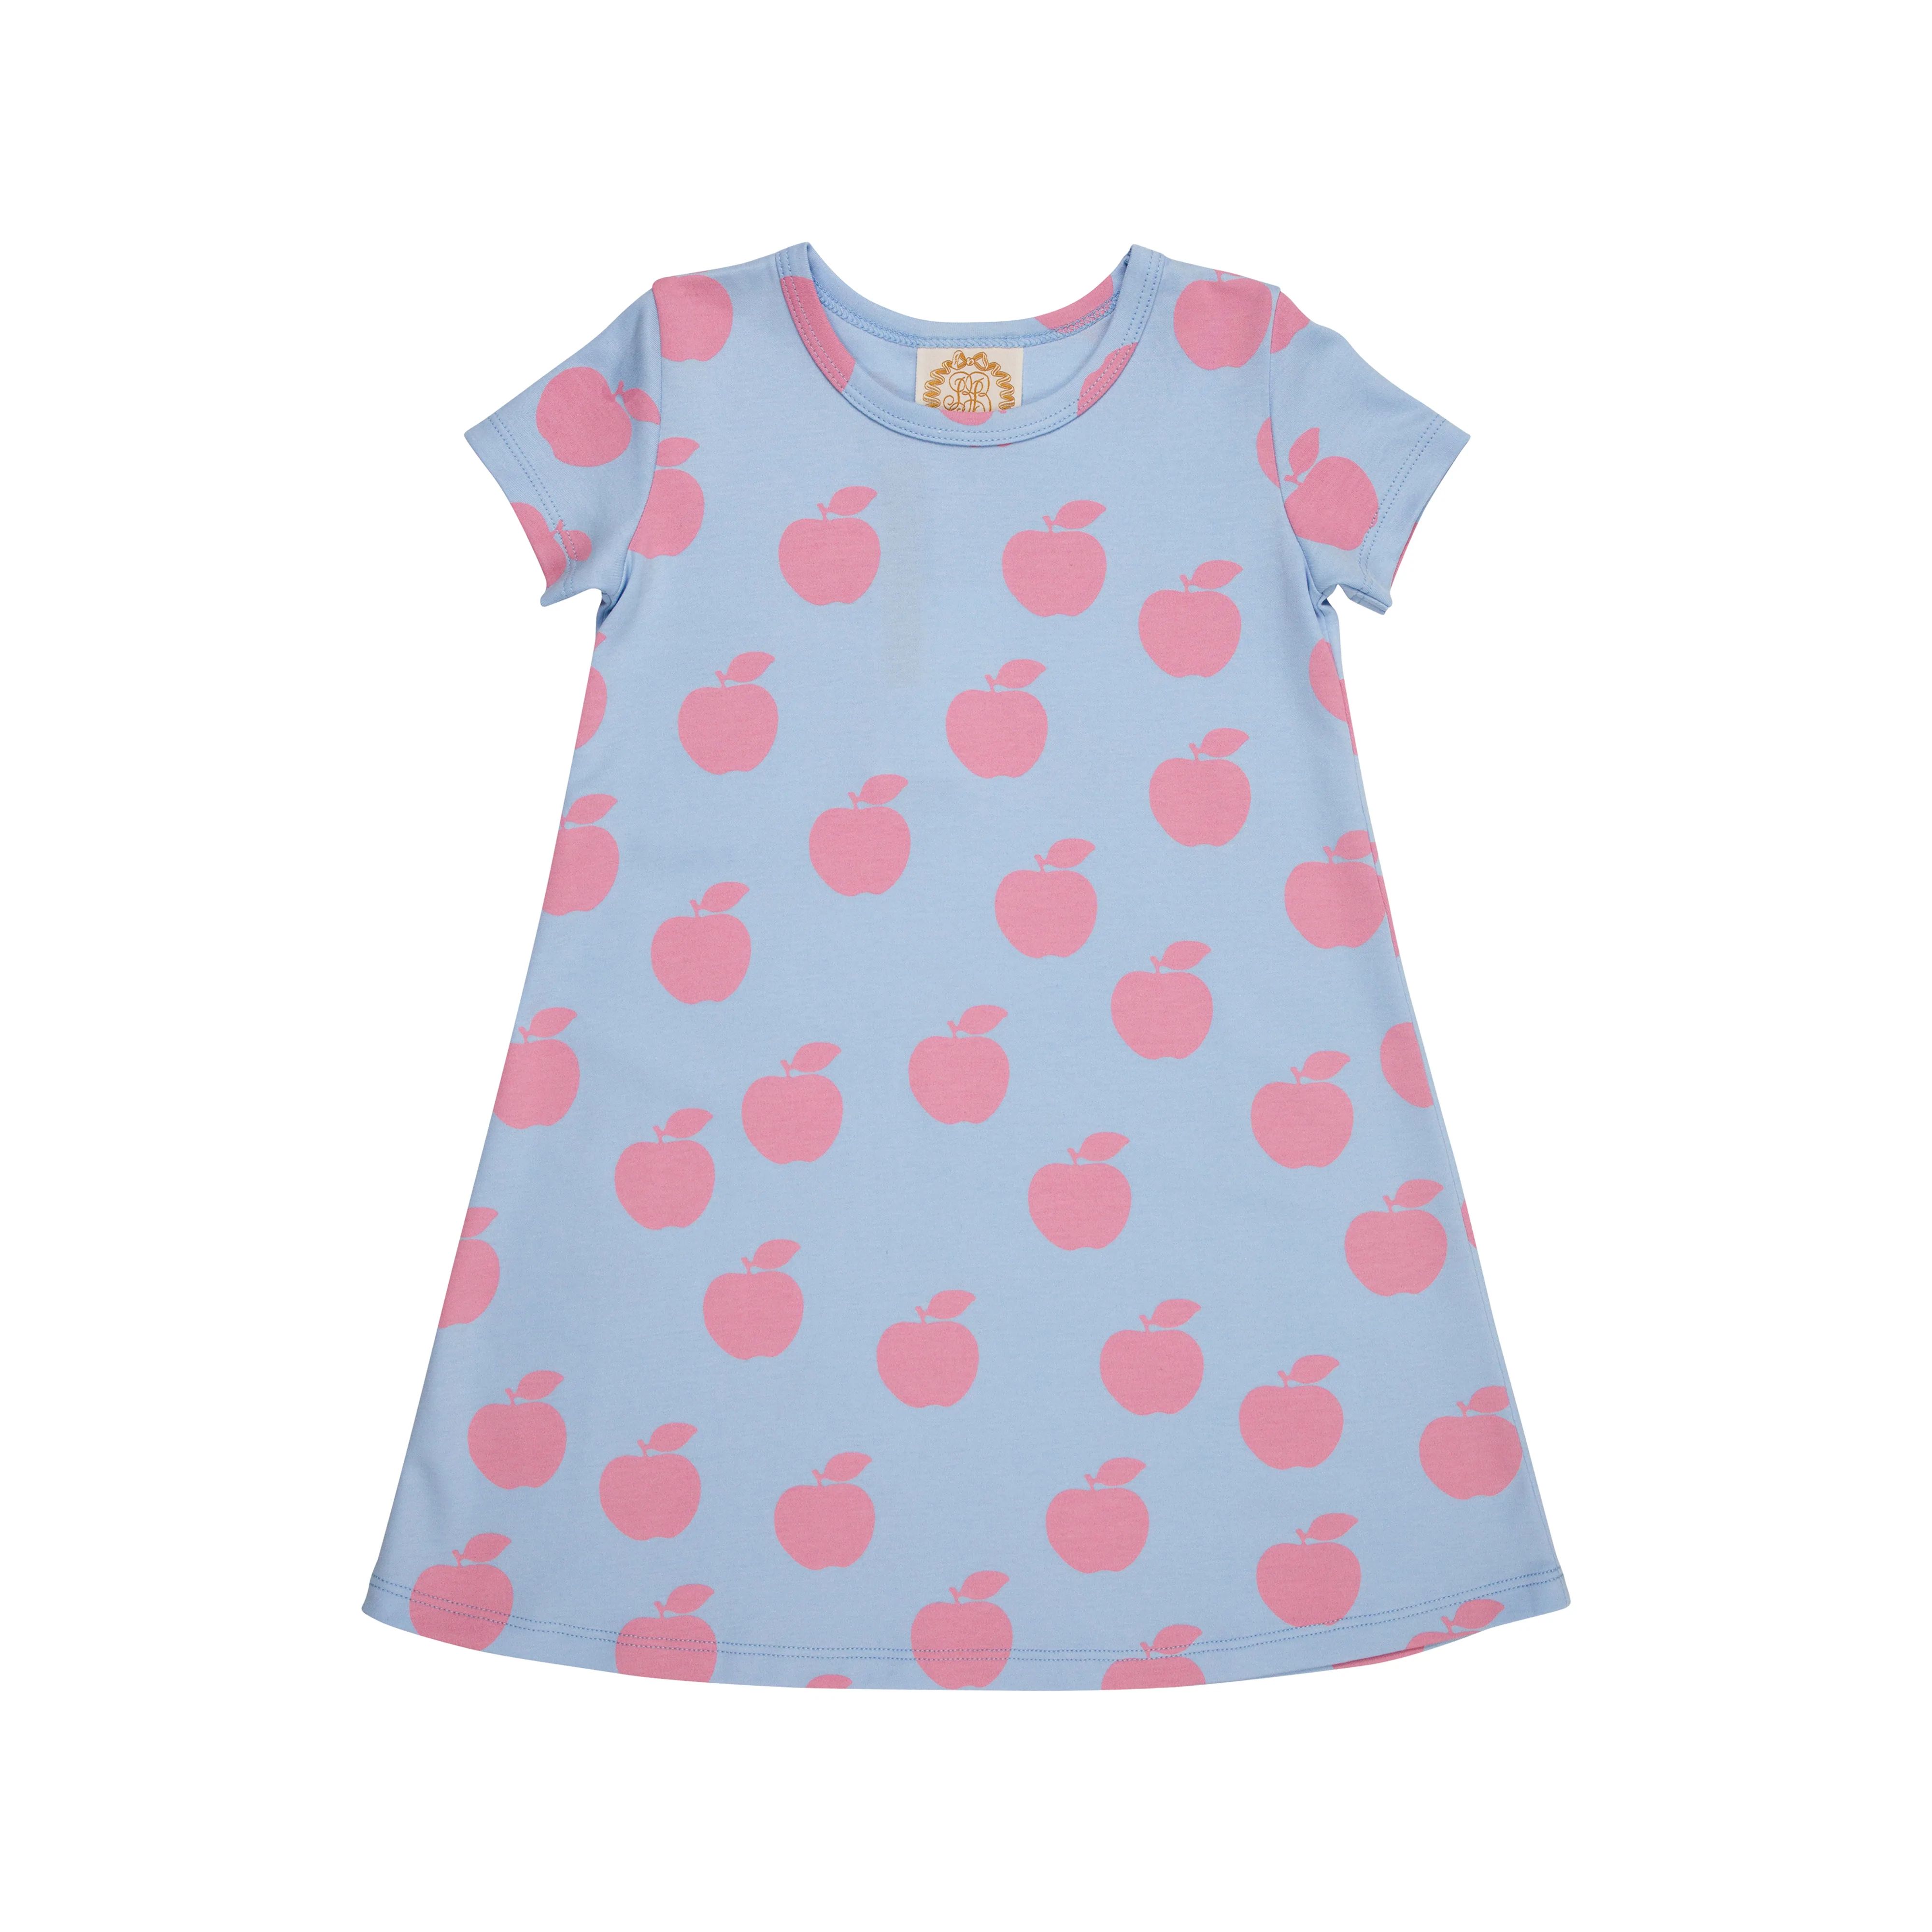 Polly Play Dress - Appleberry Orchard | The Beaufort Bonnet Company